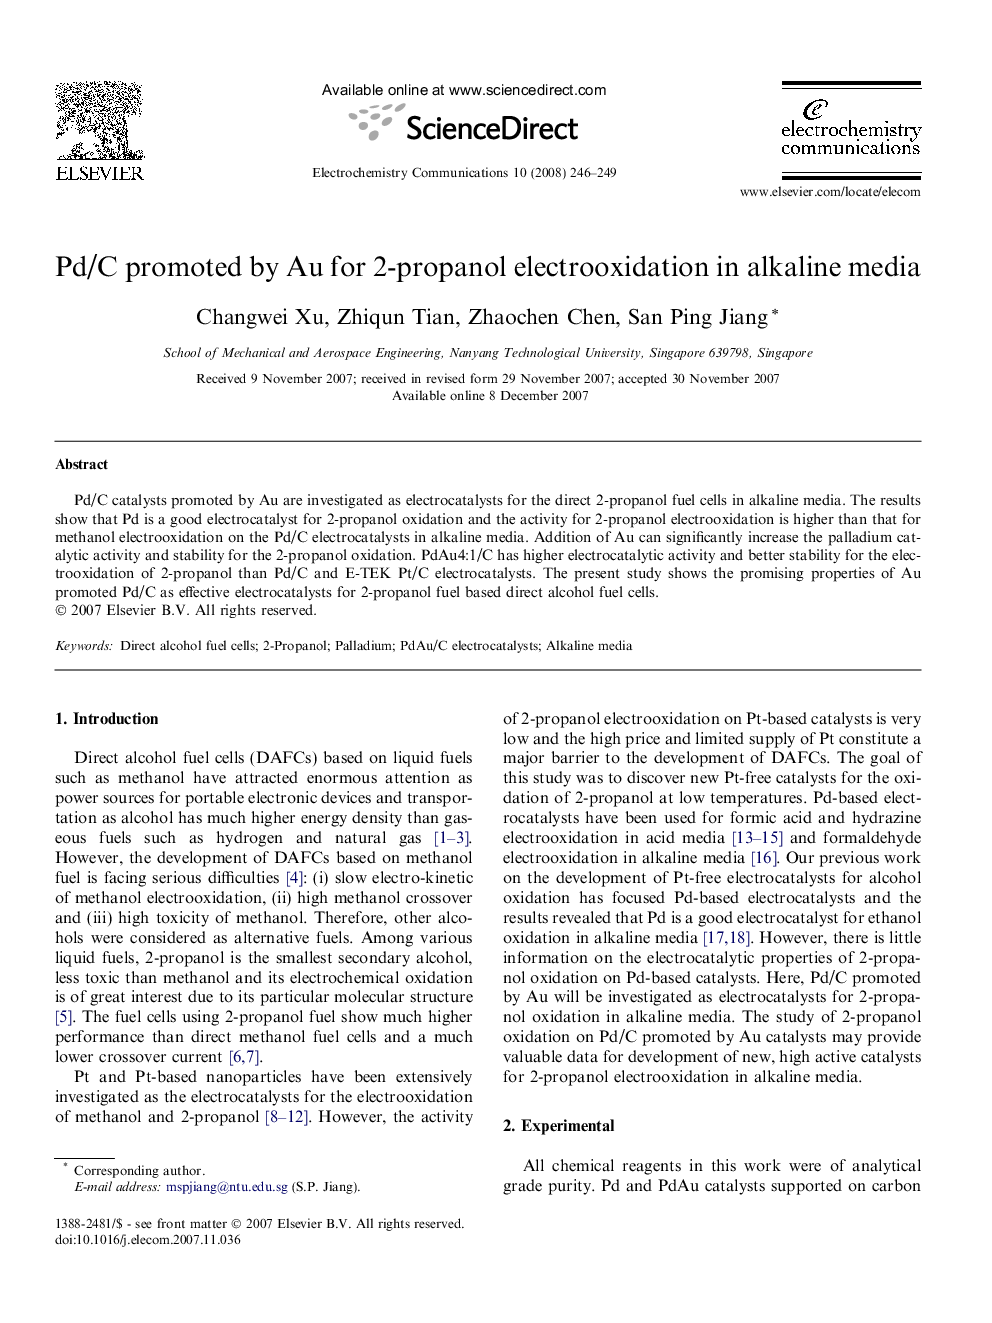 Pd/C promoted by Au for 2-propanol electrooxidation in alkaline media